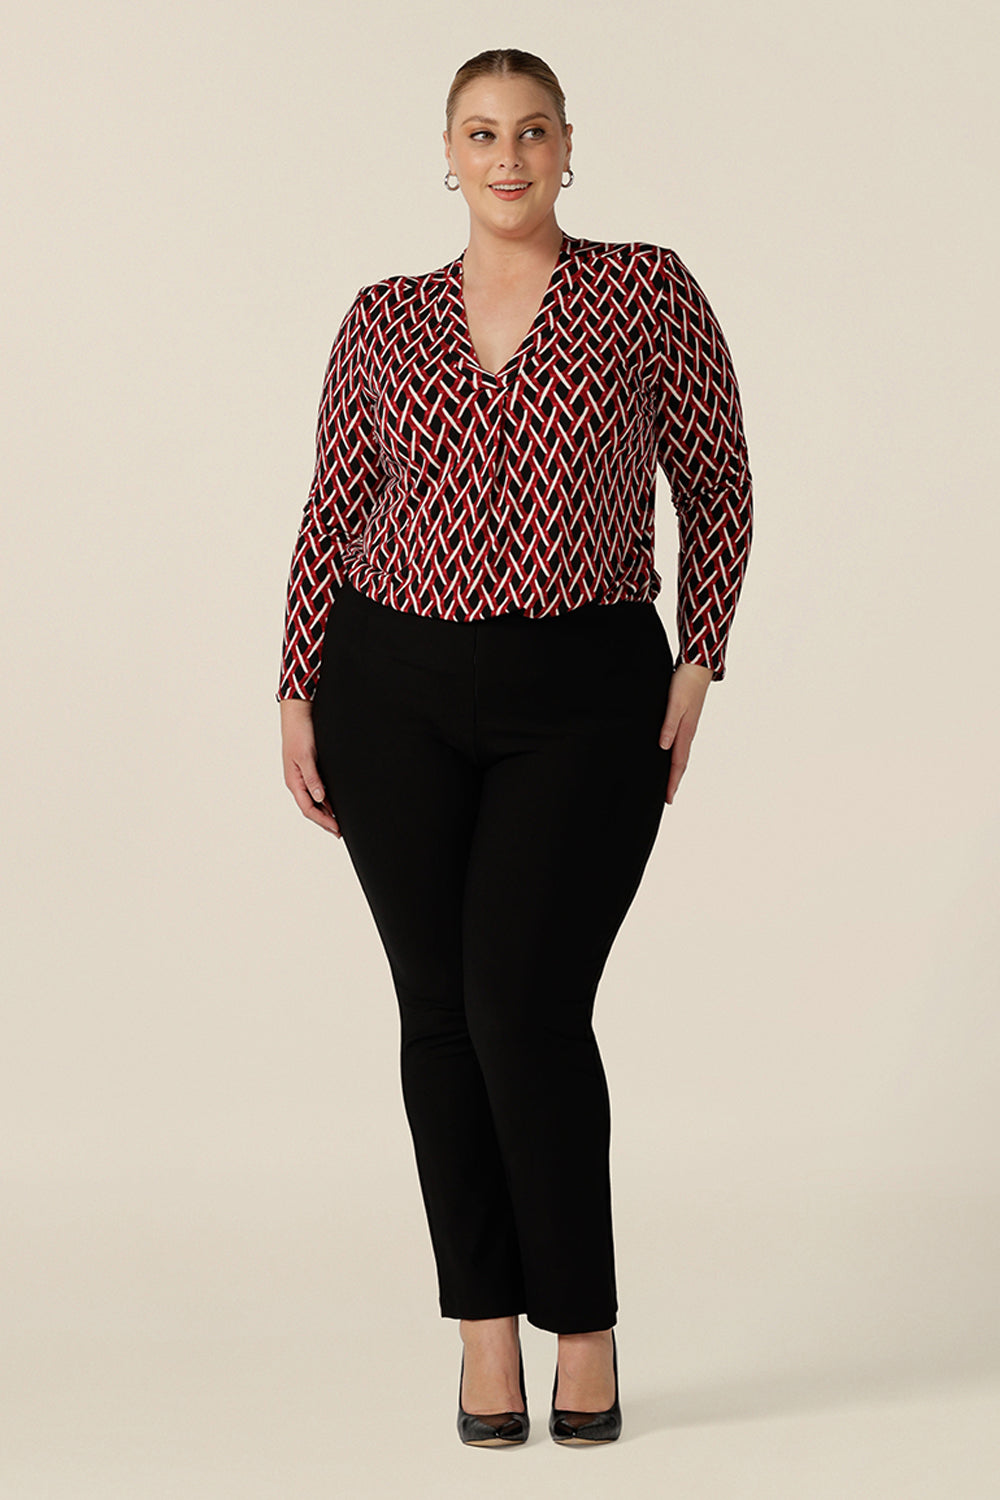 A long sleeve ladies work top, this red, white and black chevron print V-neck top has a shirttail hem. Worn with slim leg black pants for work, by a plus size, size 18 woman,  shop this office top at Australian fashion brand, L&f in sizes 8 to 24.